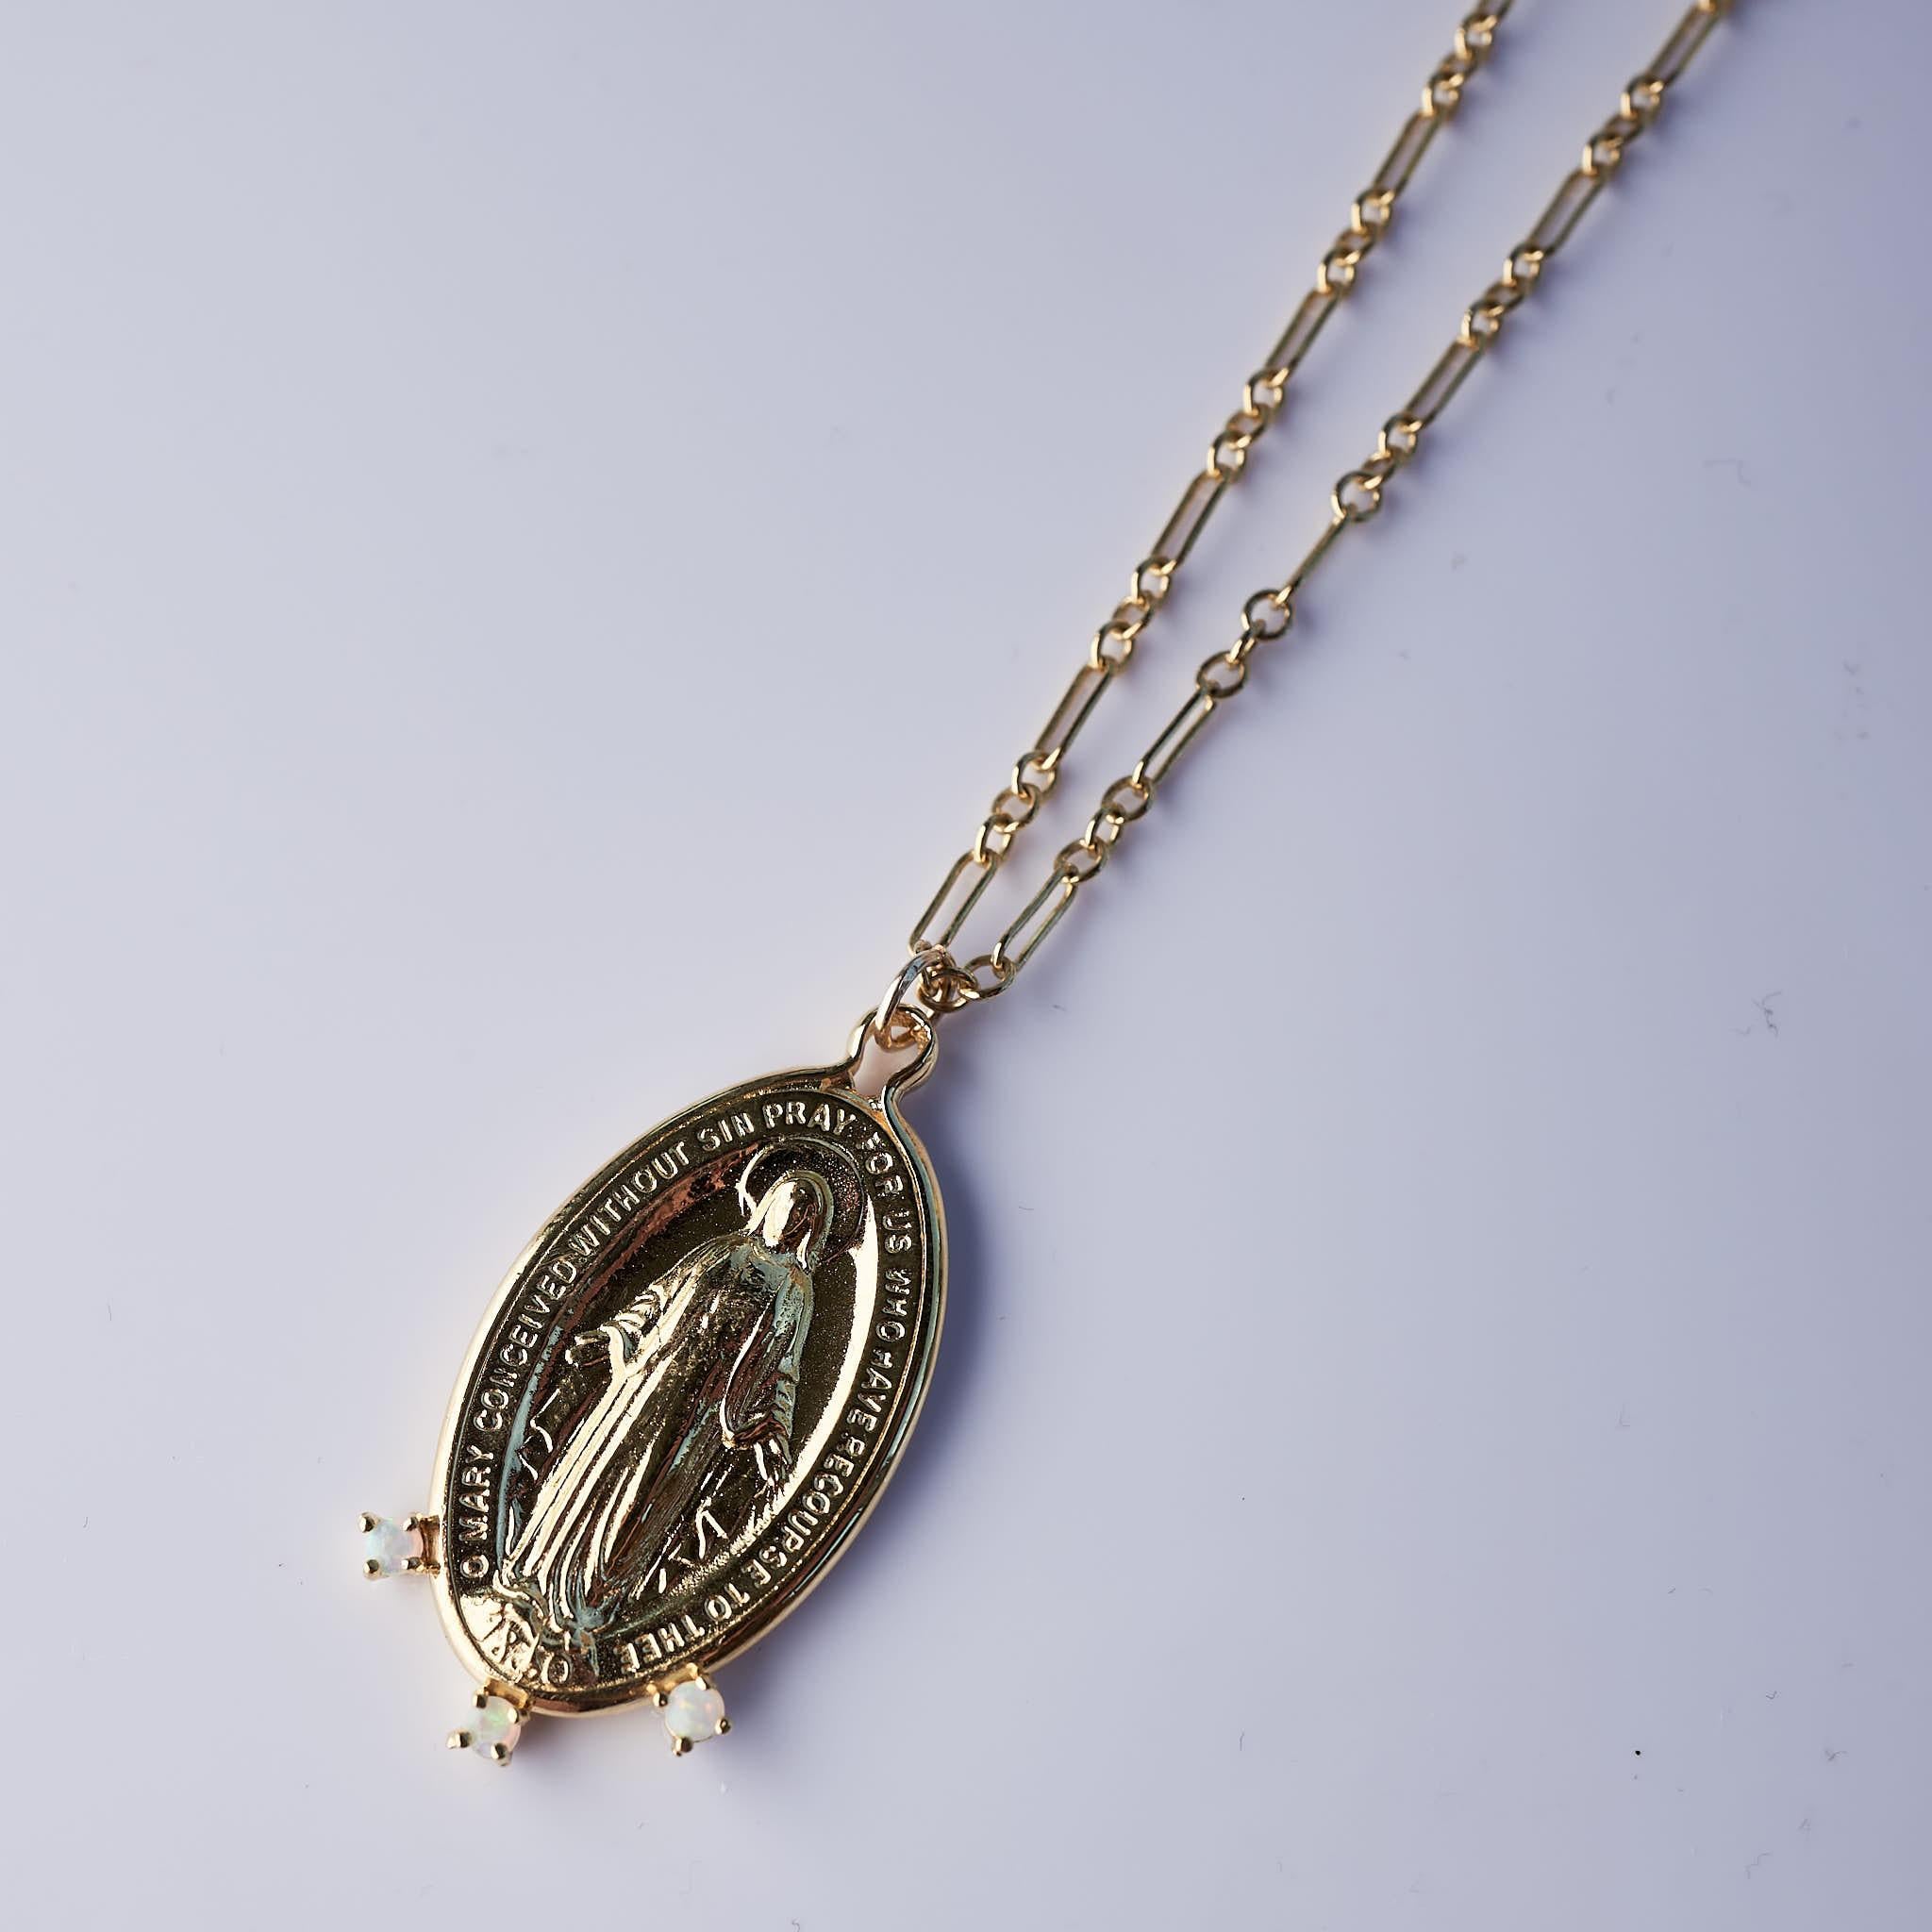 Oval Medal Chain Opal Gold Filled Necklace Virgin Mary  14k Gold Plated Medal Designed by J Dauphin. Necklace can be used in different lengths  24